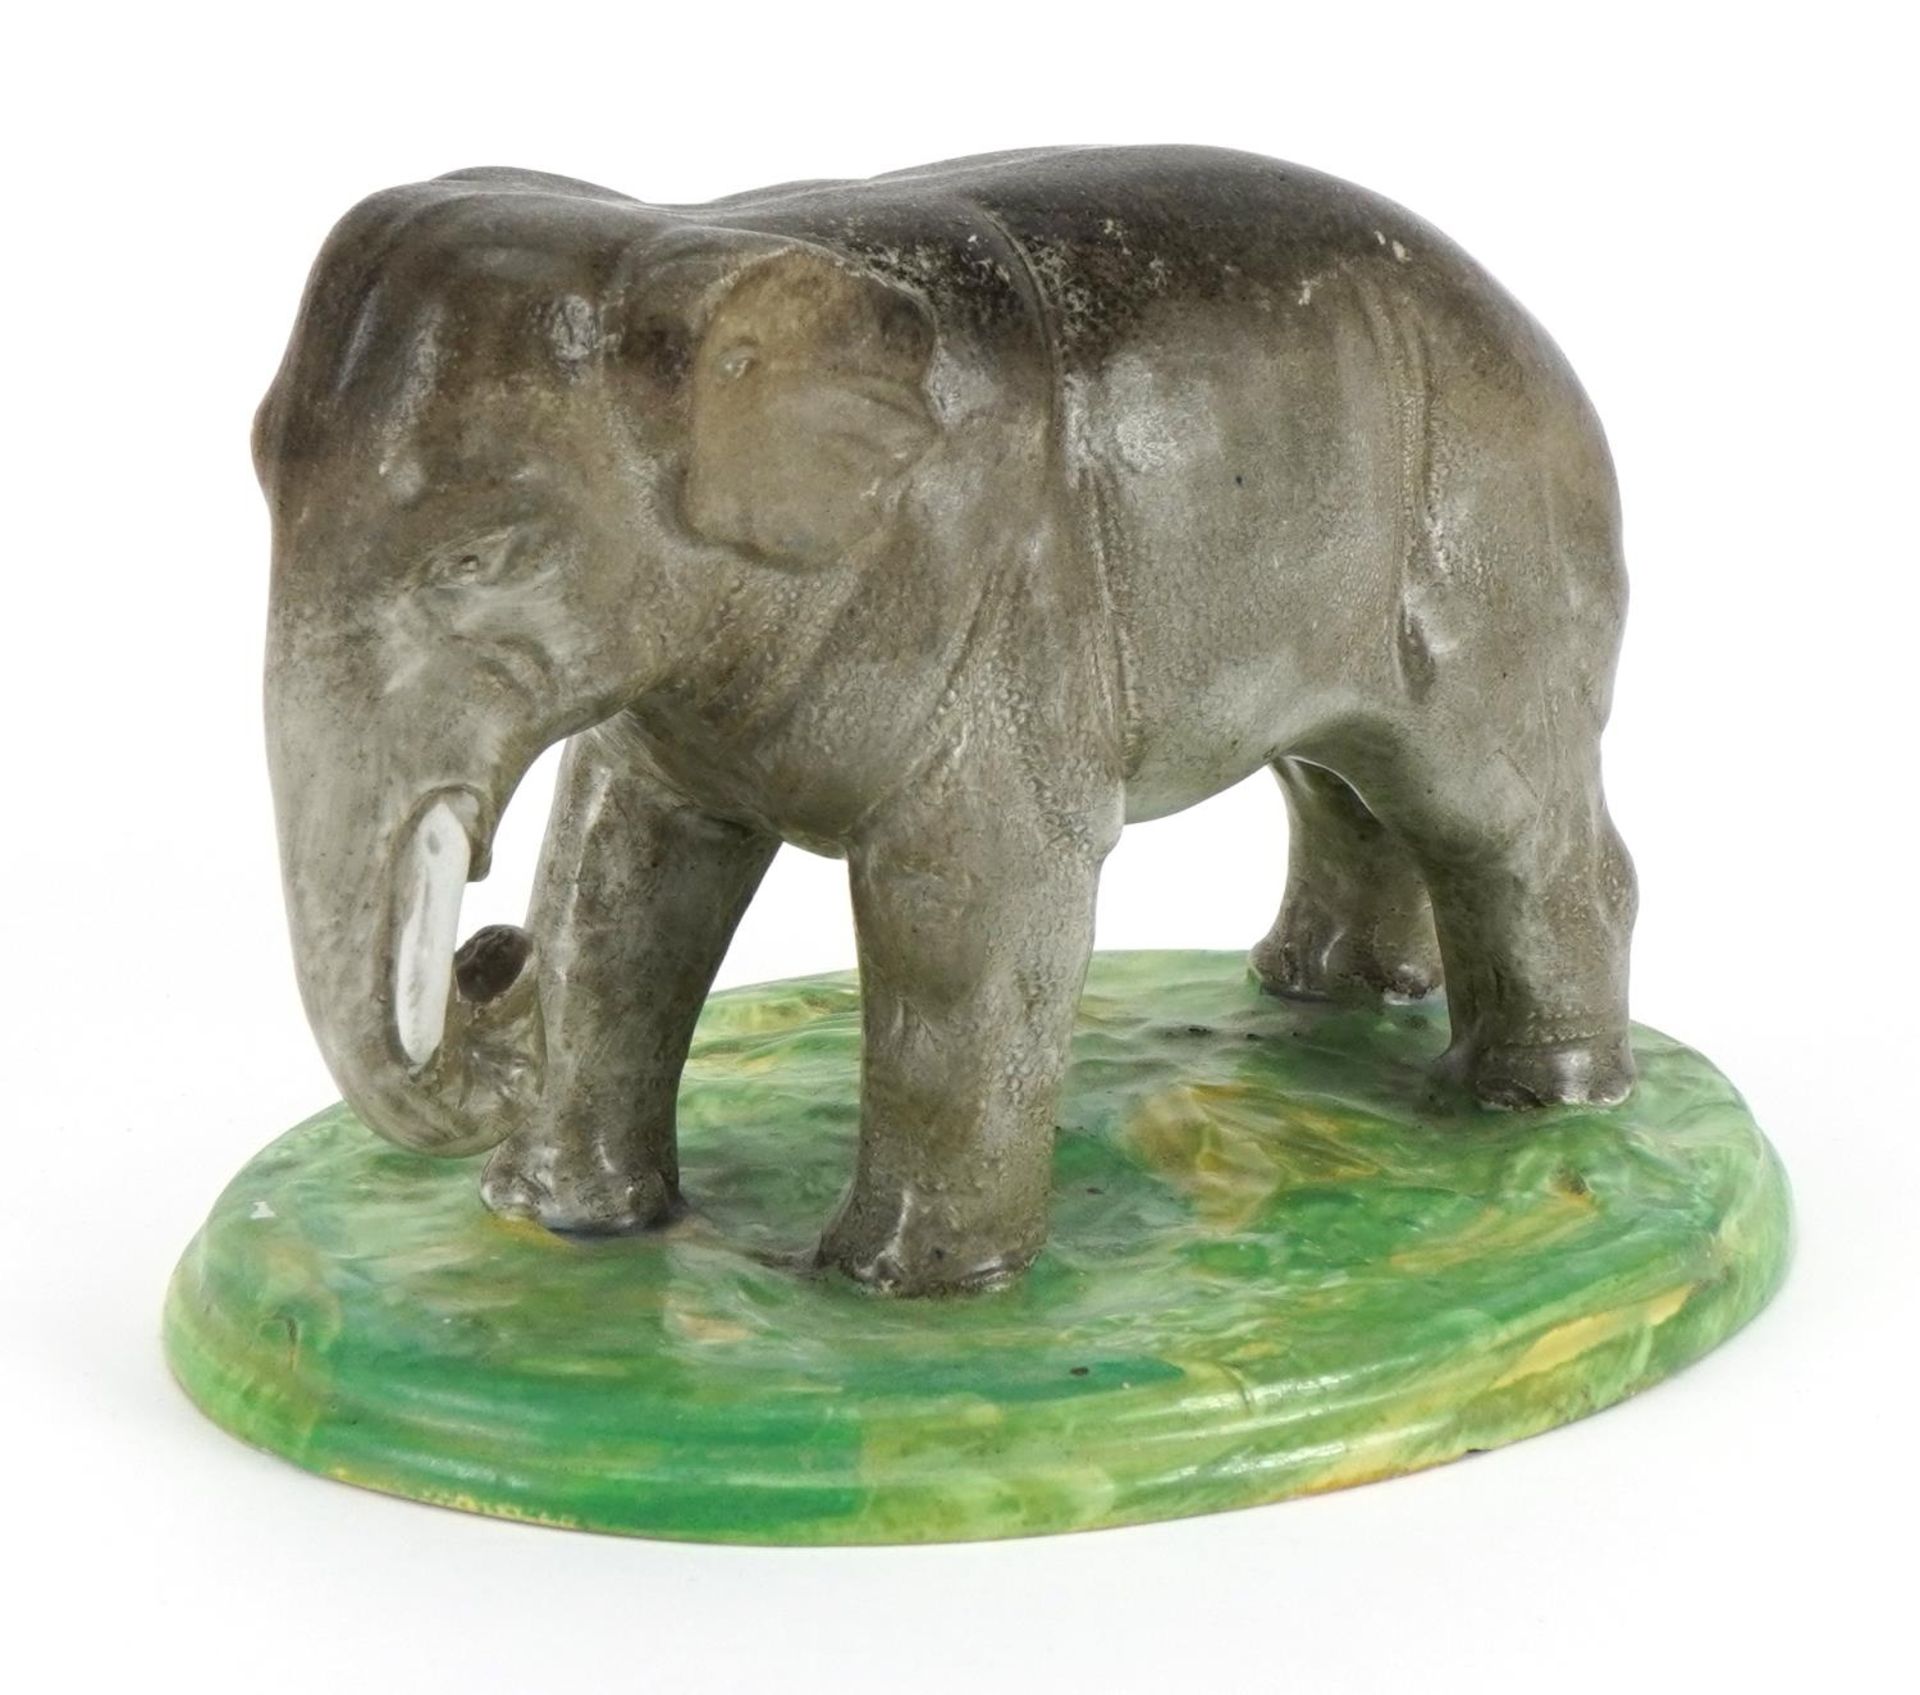 19th century pearlware model of an elephant, 21cm in length